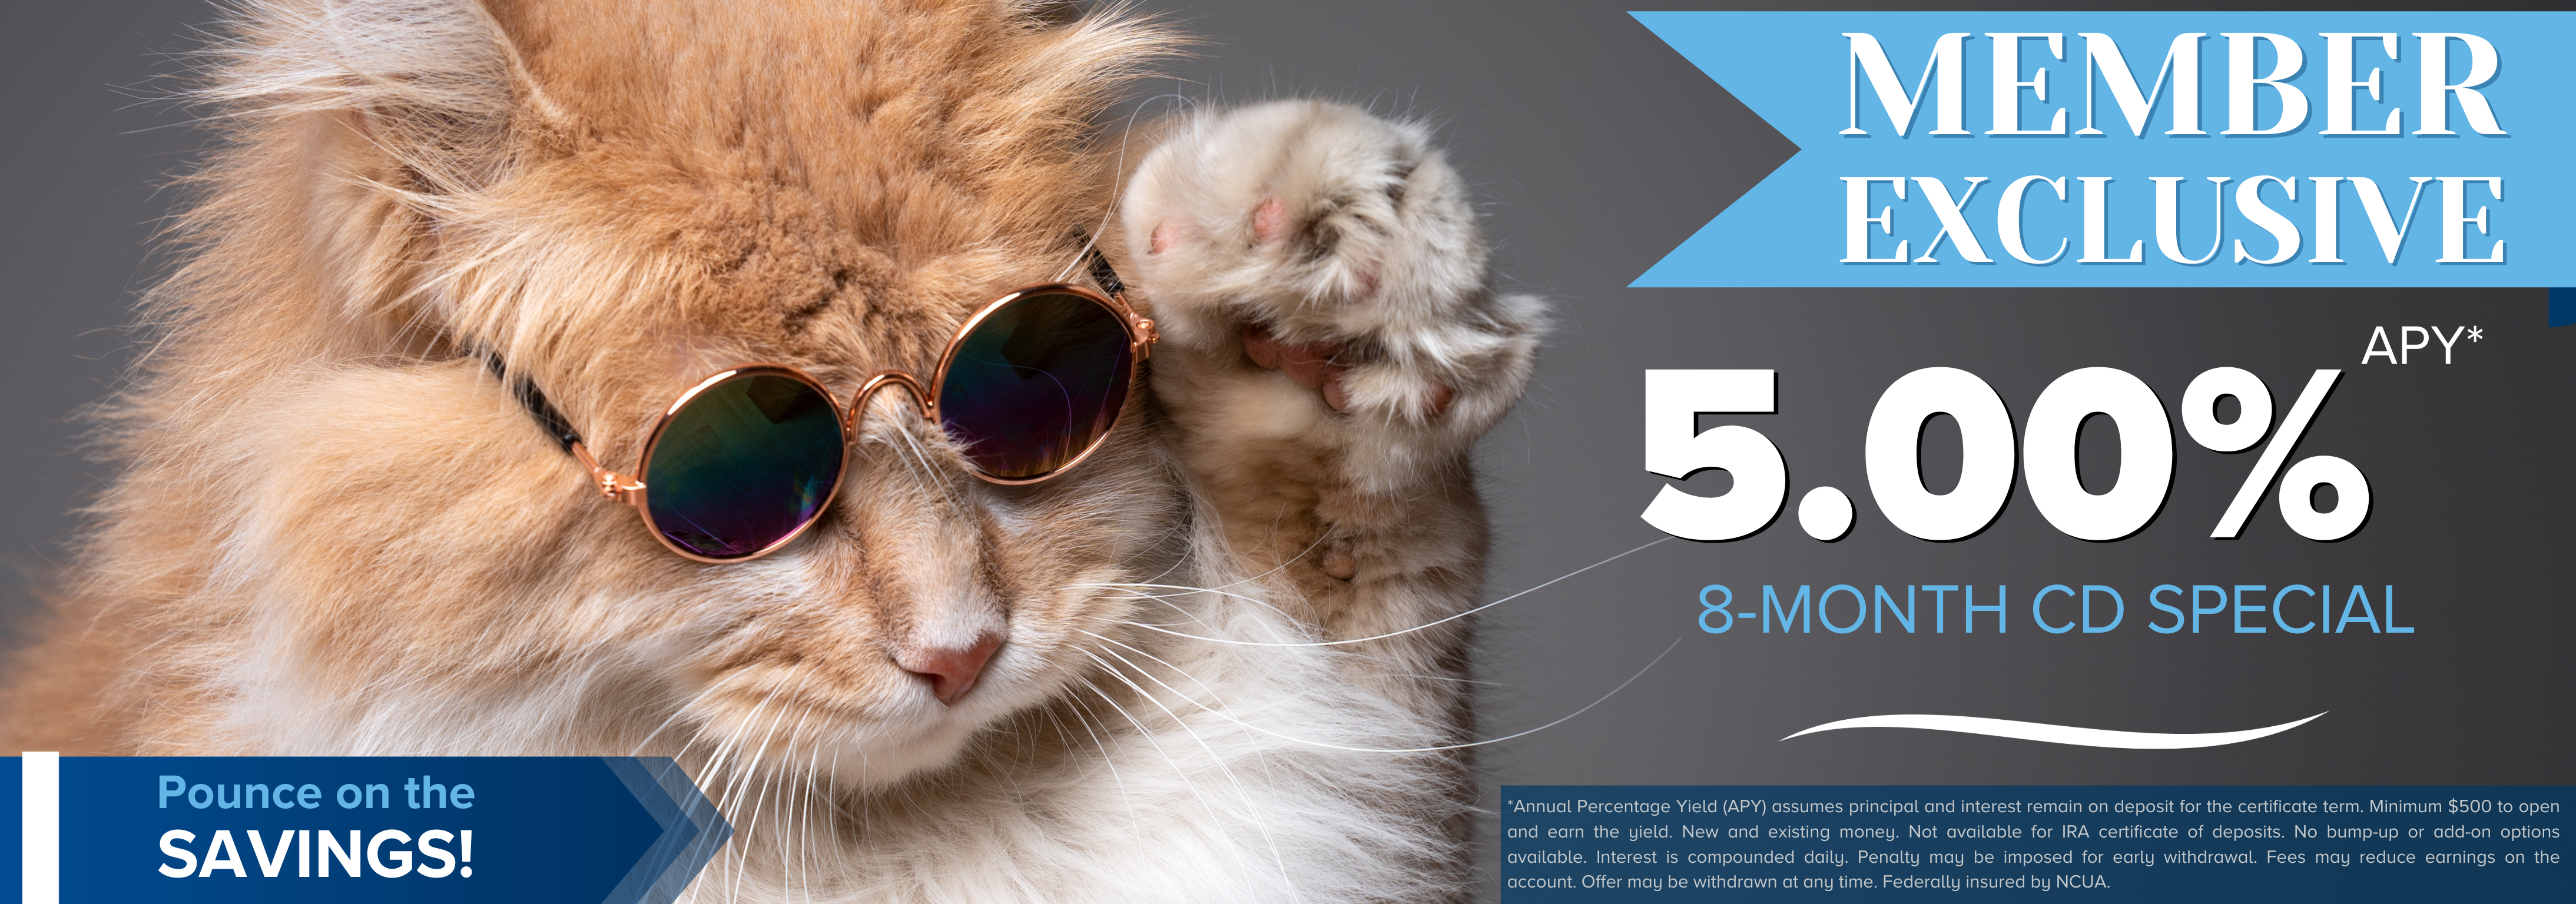 Cat lowering sunglasses from its eyes. 8-Month Member-Exclusive CD Special for 5.00%A PY*